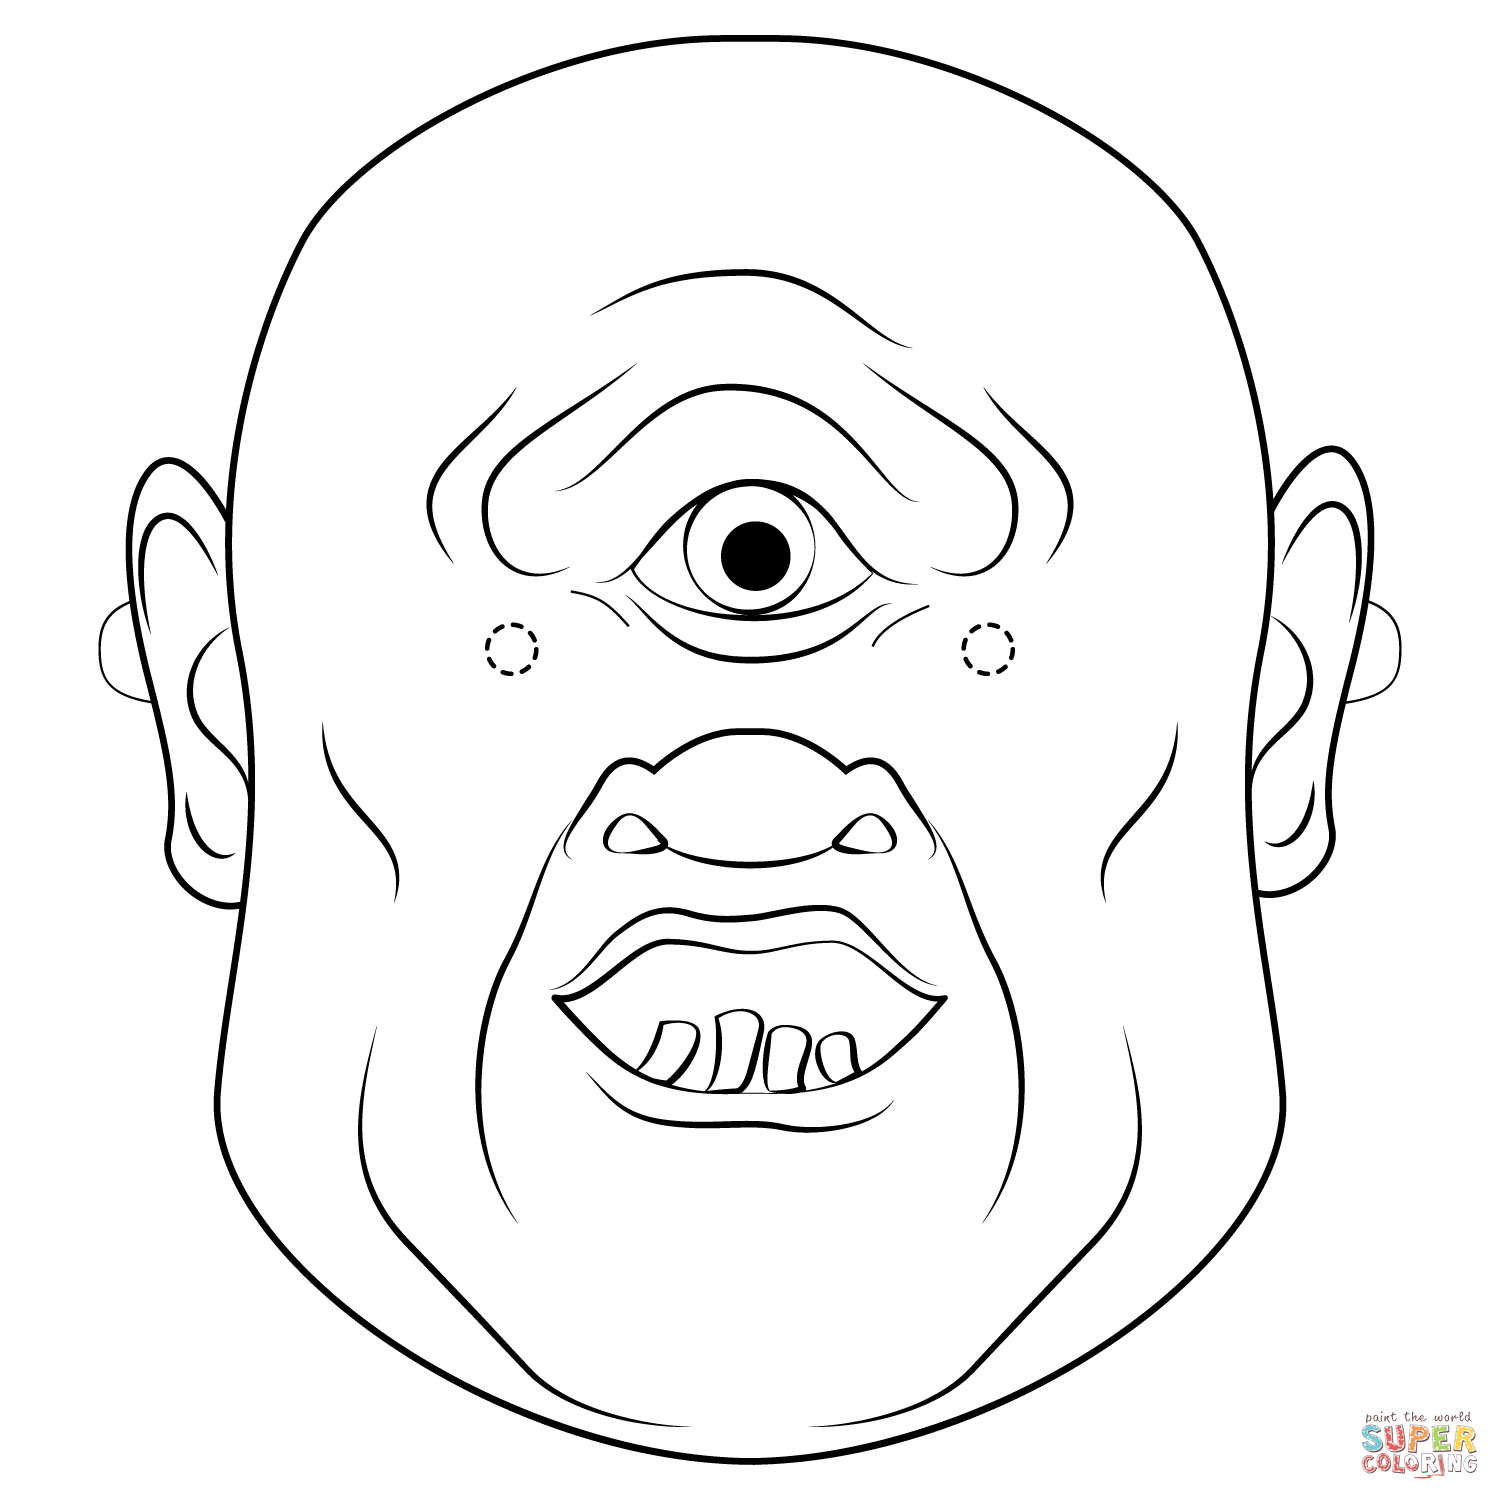 Cyclops mask coloring page free printable coloring pages